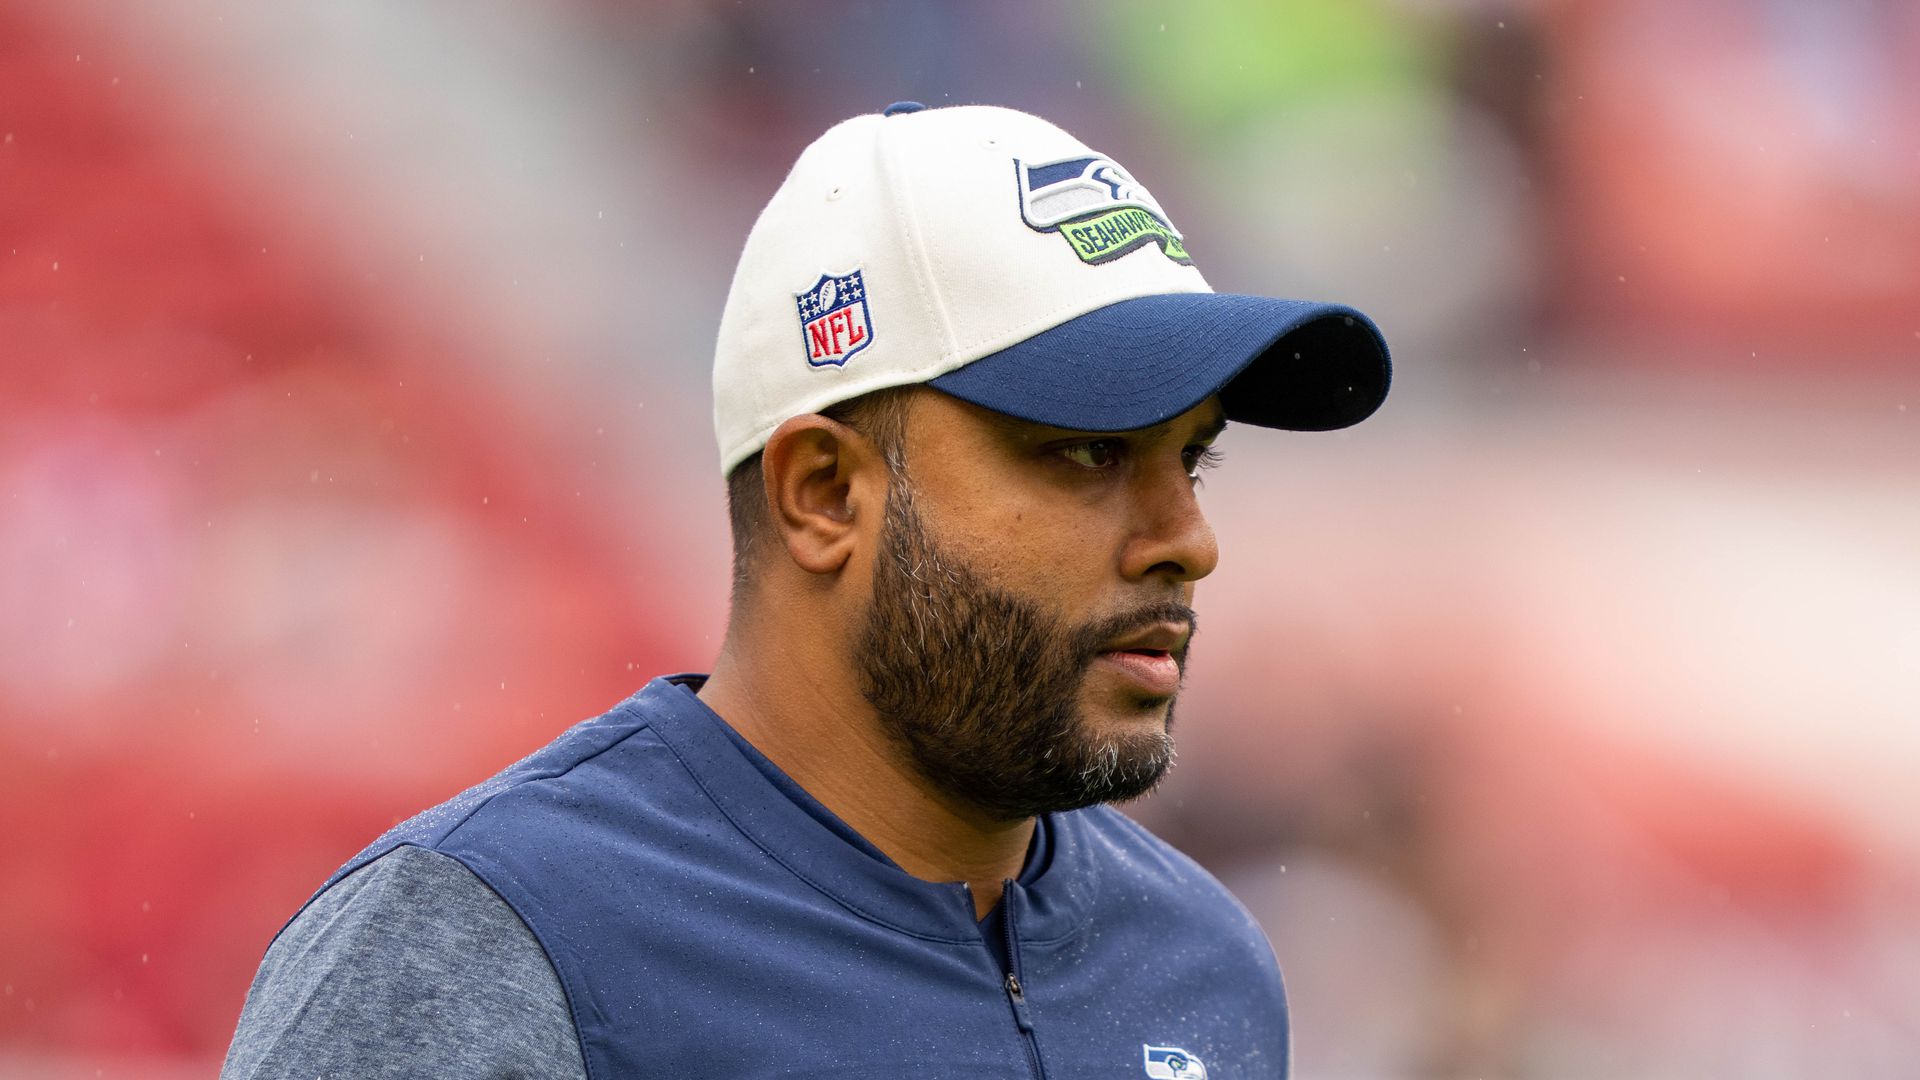 rams make another coaching hire, this time taking someone away from the seahawks?